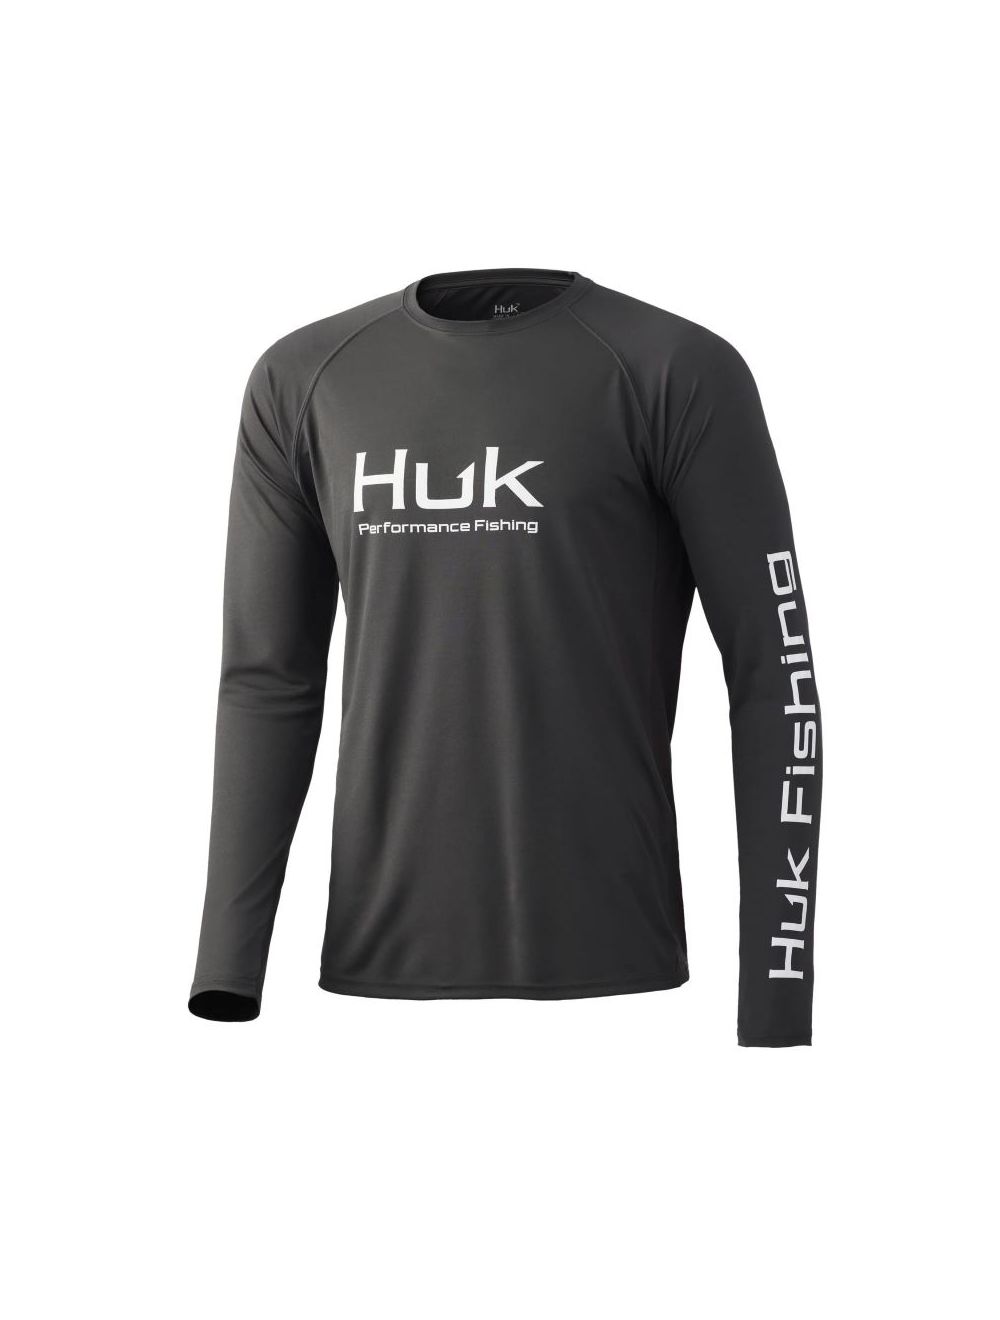 Huk Pursuit Vented Long Sleeve BIG & TALL